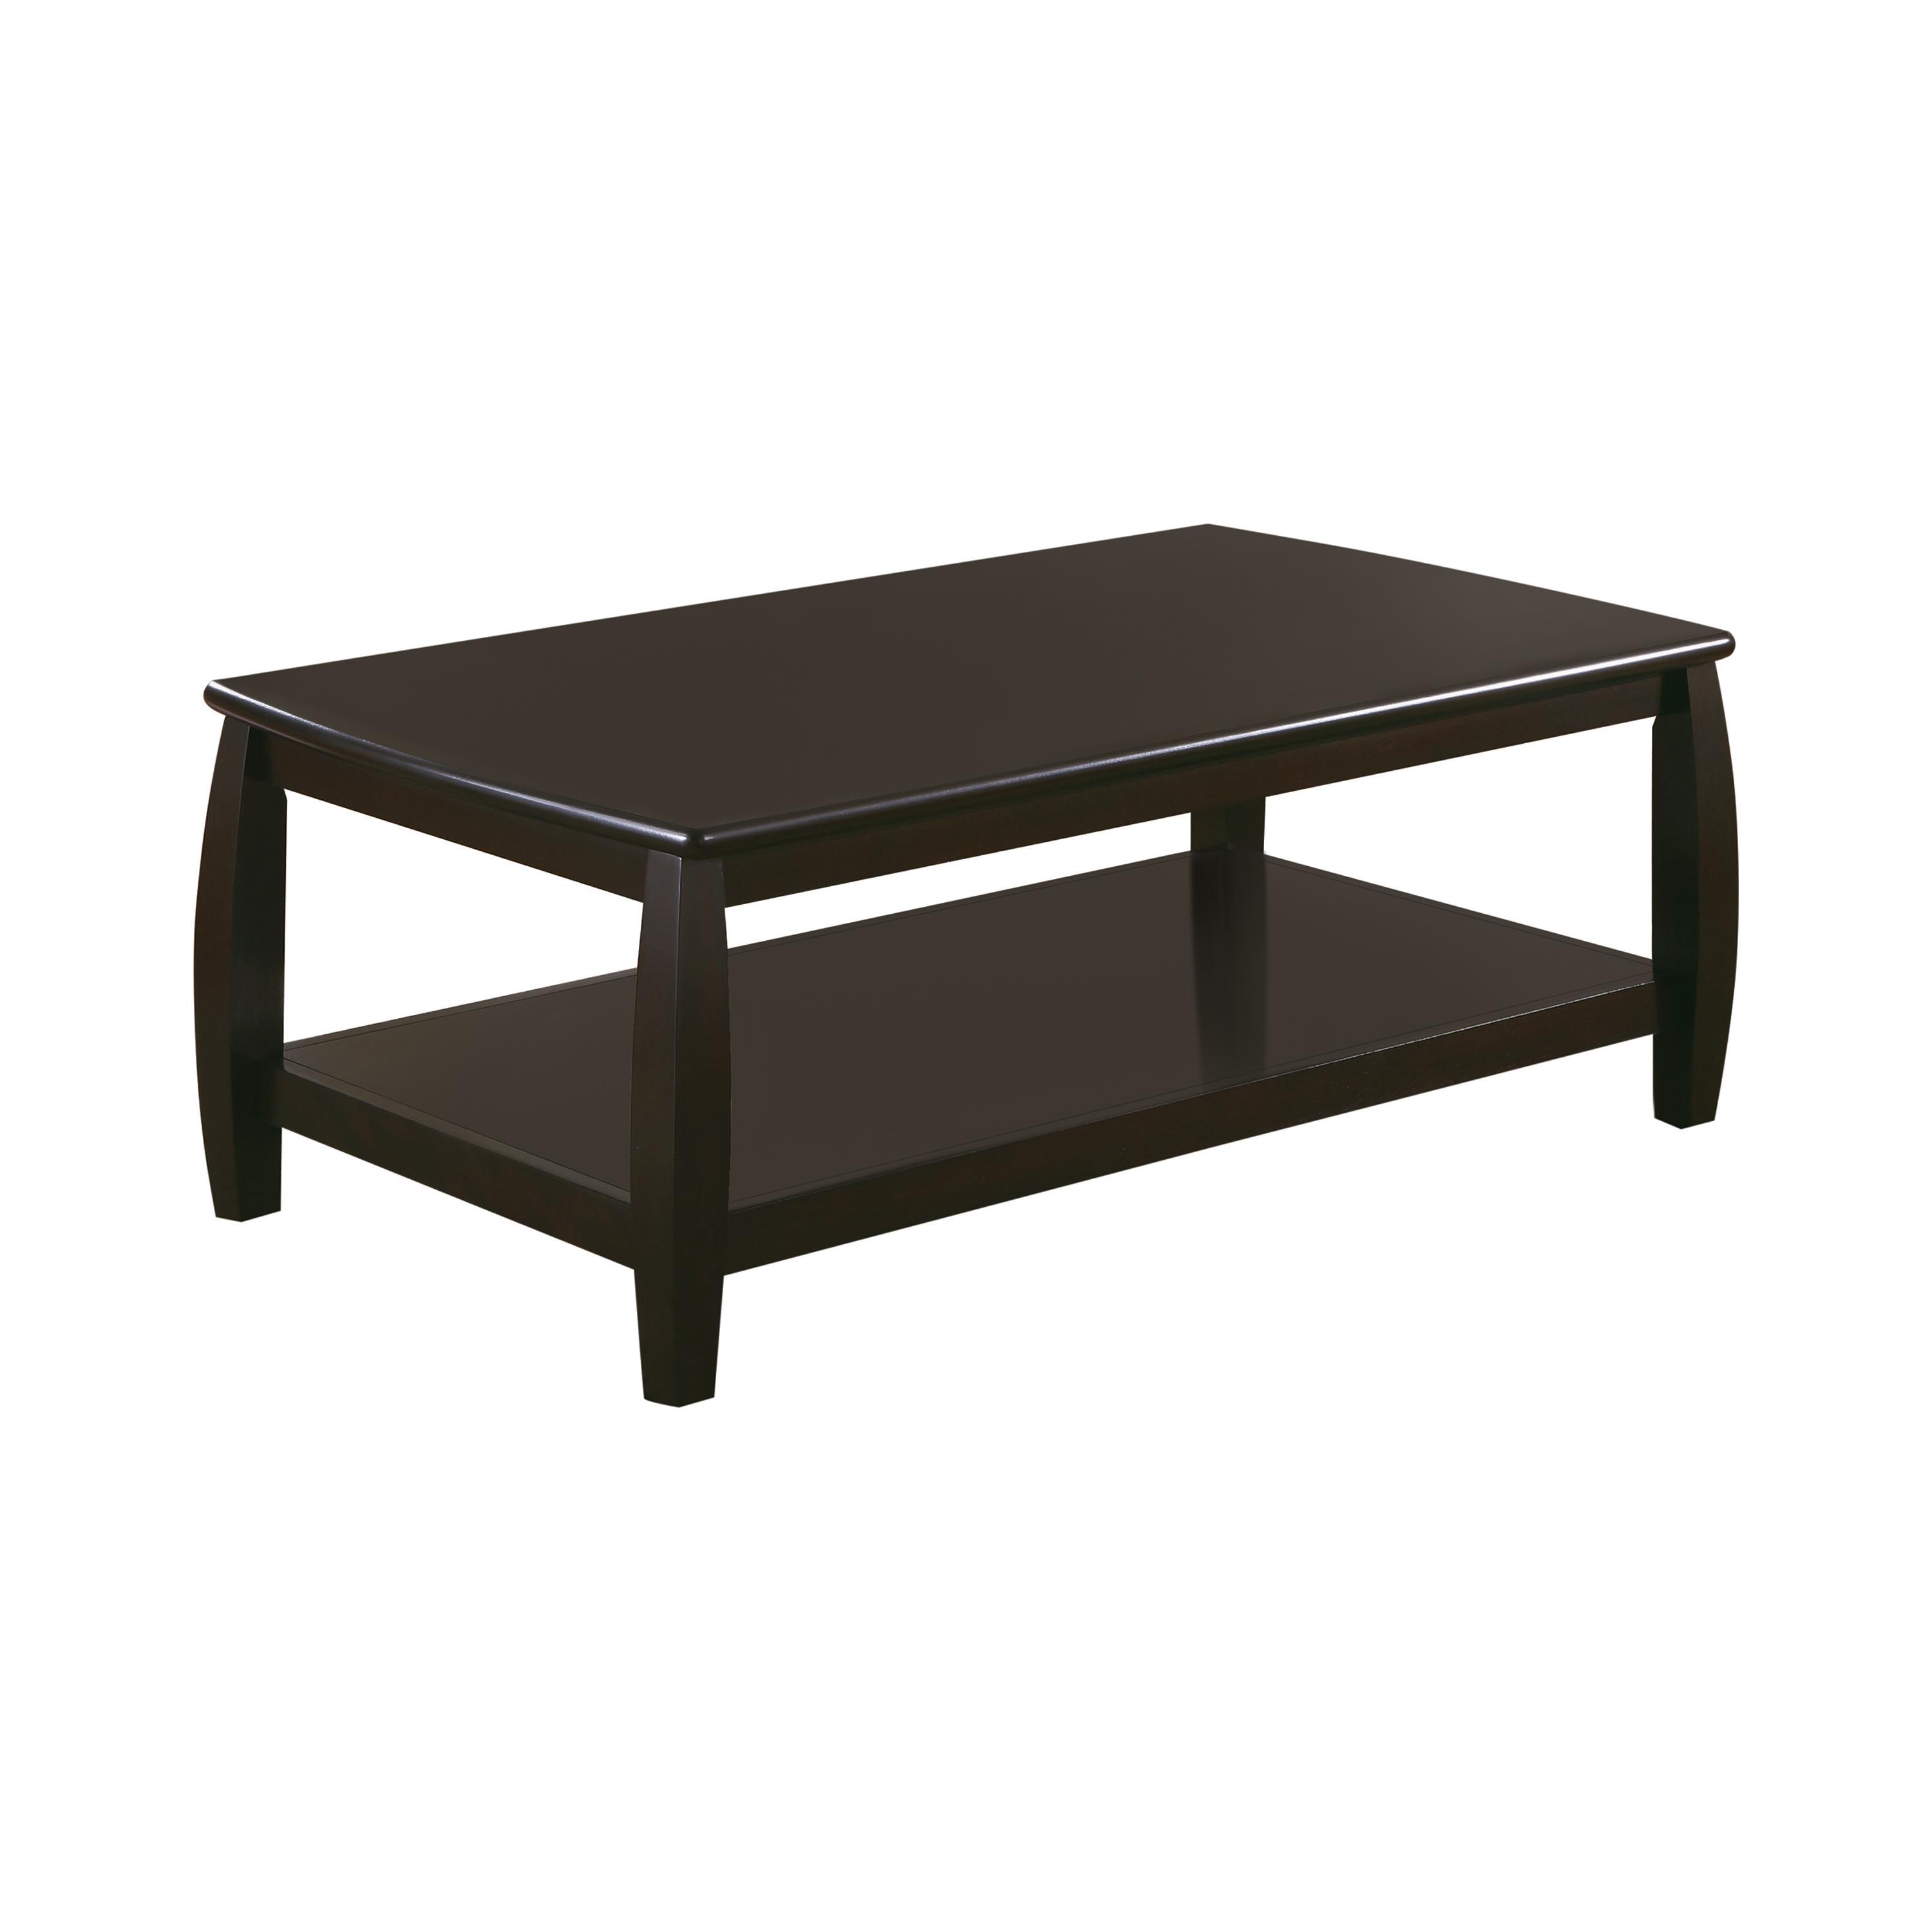 Transitional Coffee Table 701078 701078 in Espresso 